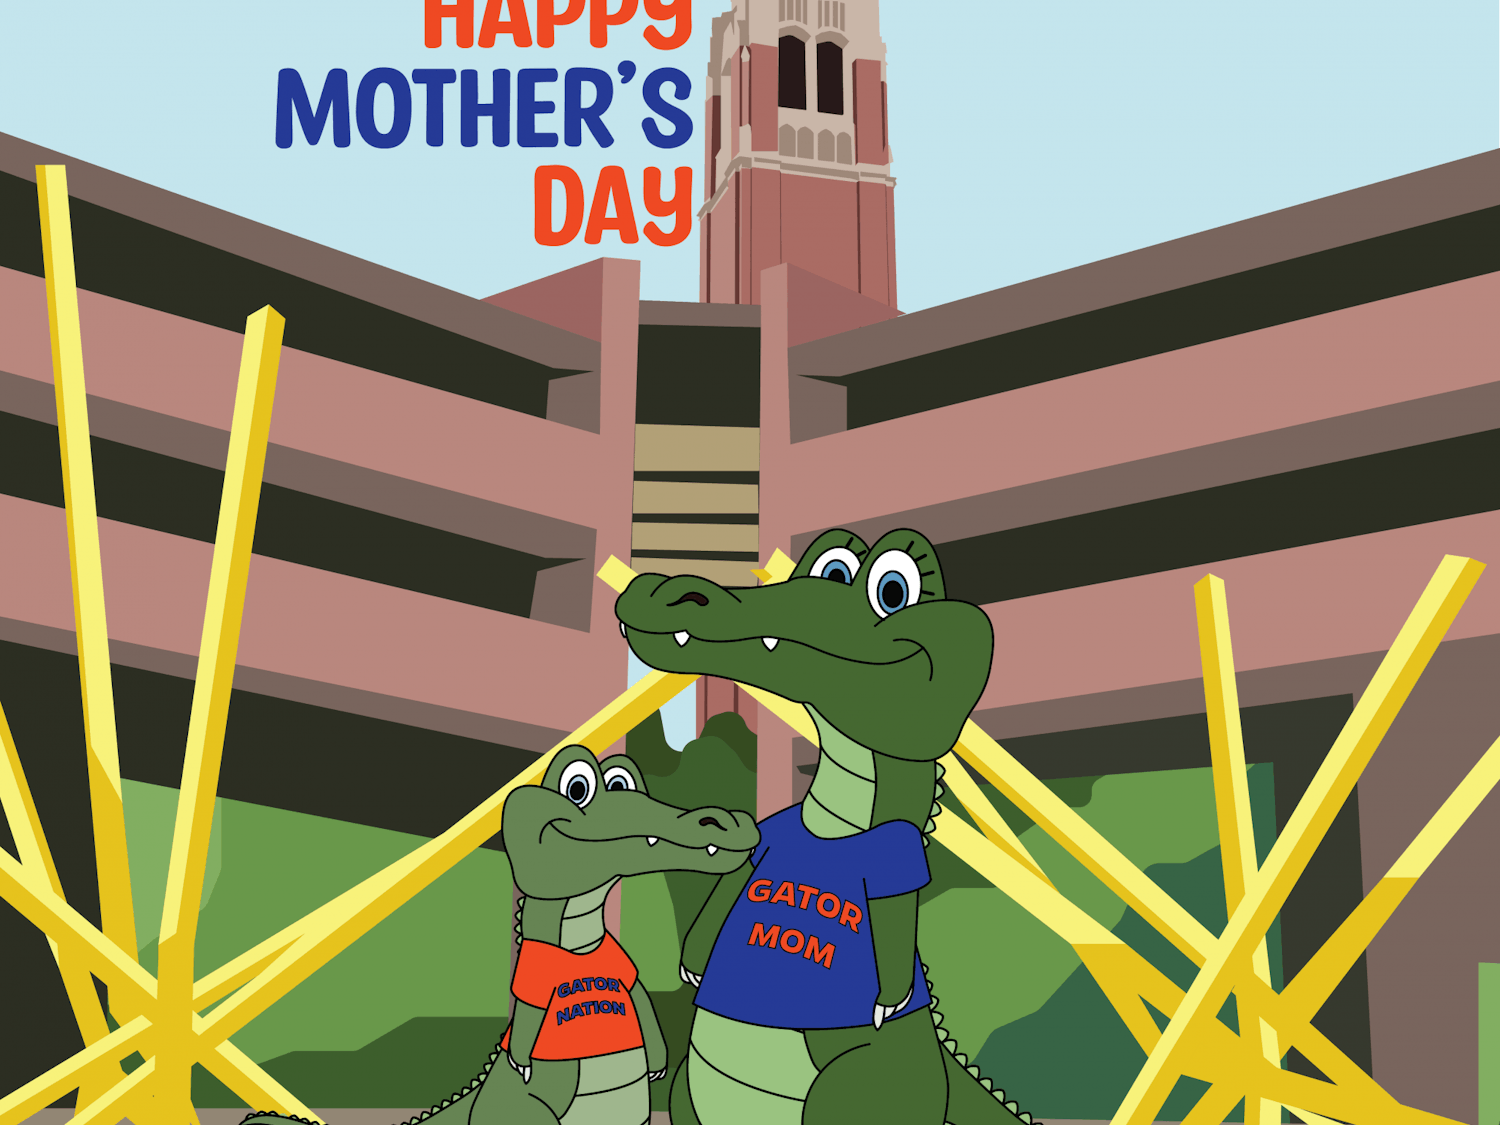 Between long distances and new traditions, Mother&#x27;s Day looks different for moms of college kids.